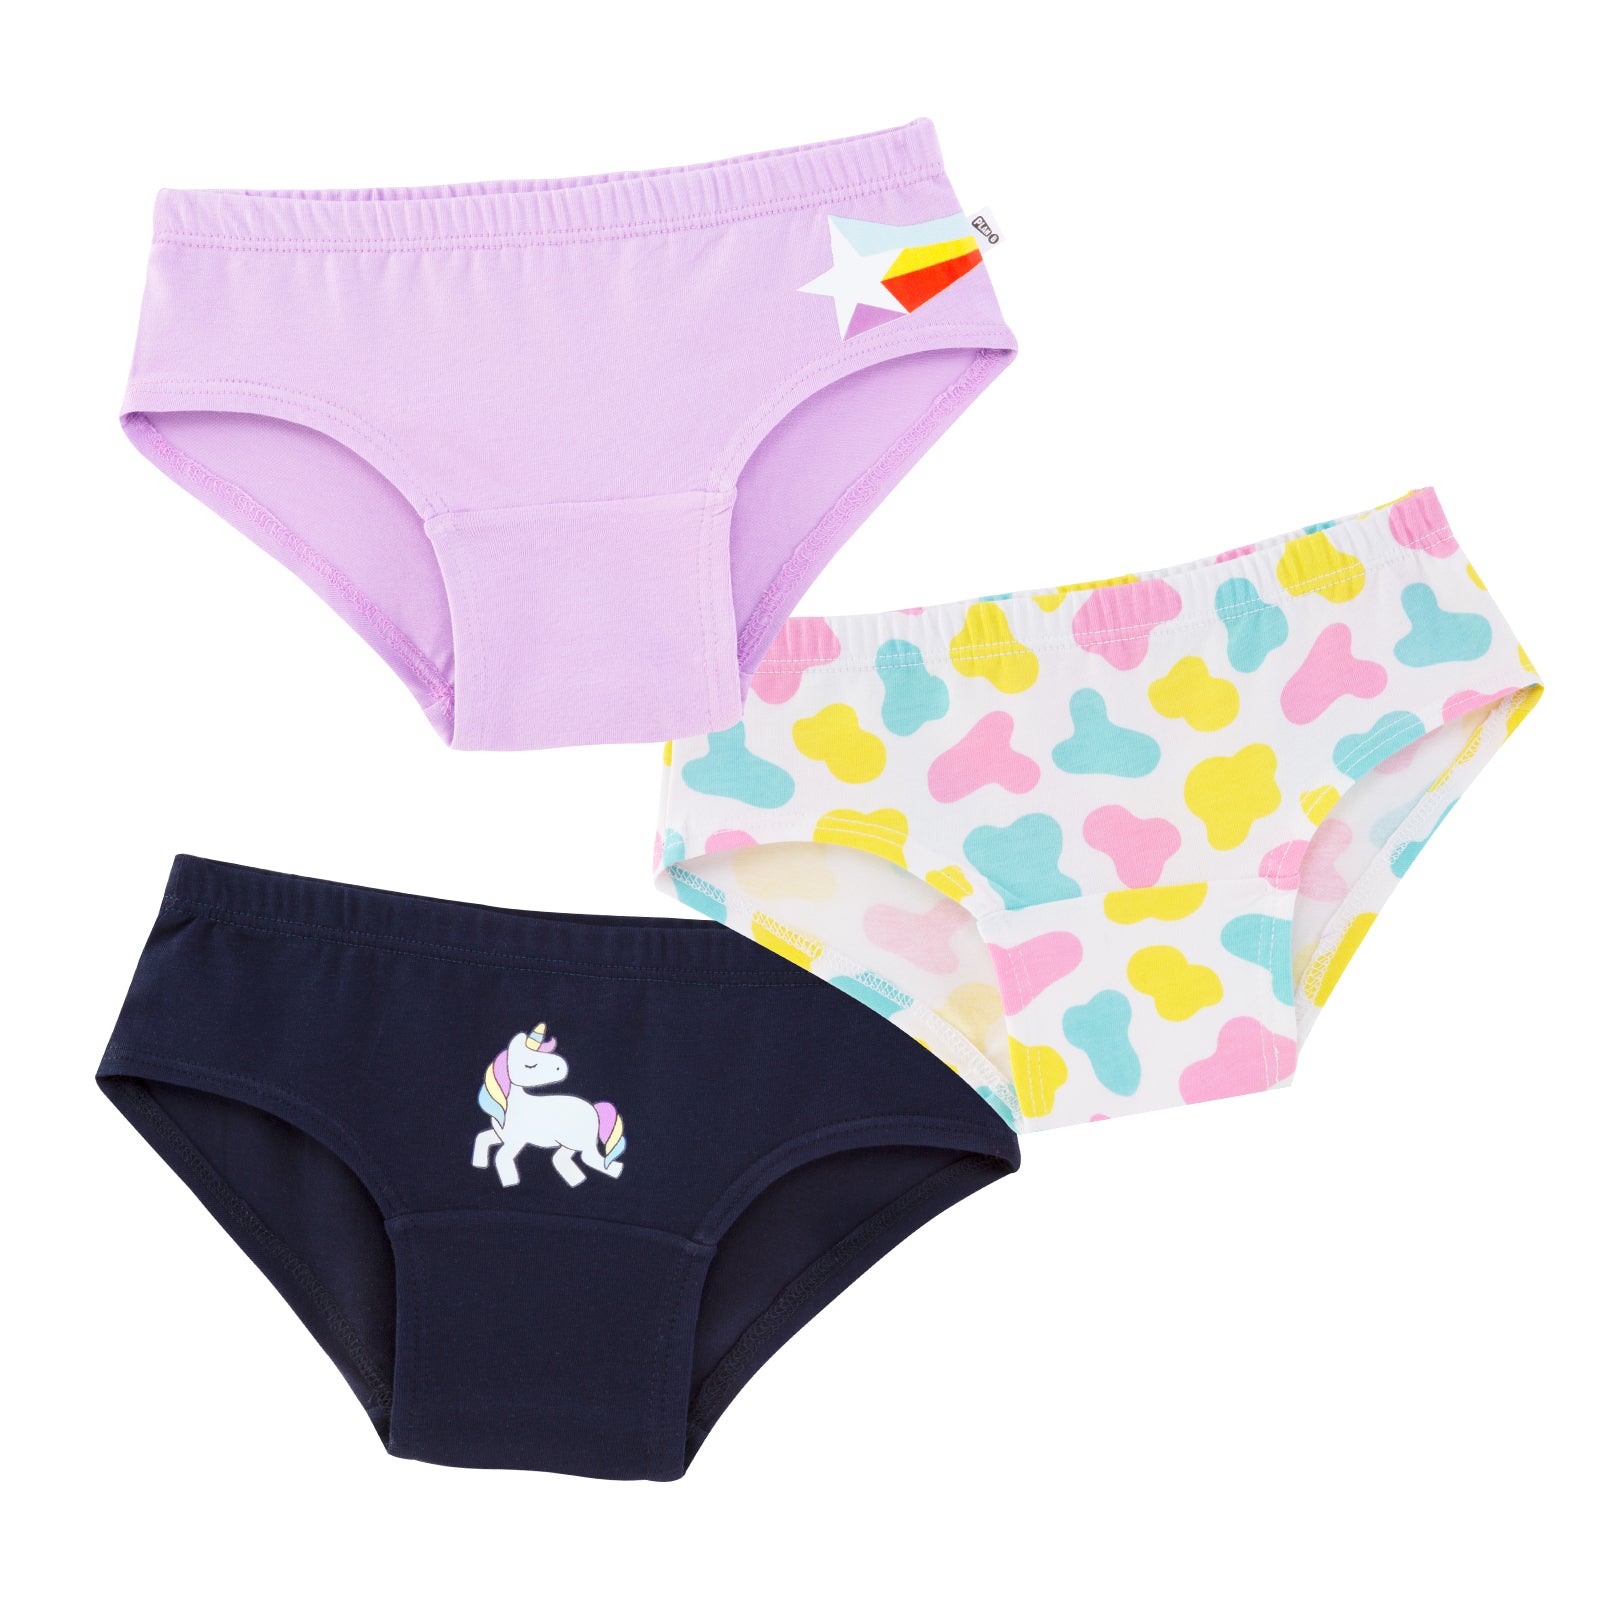 Kids Bikini/Hipster pack of 3 Assorted colours - Inneramour